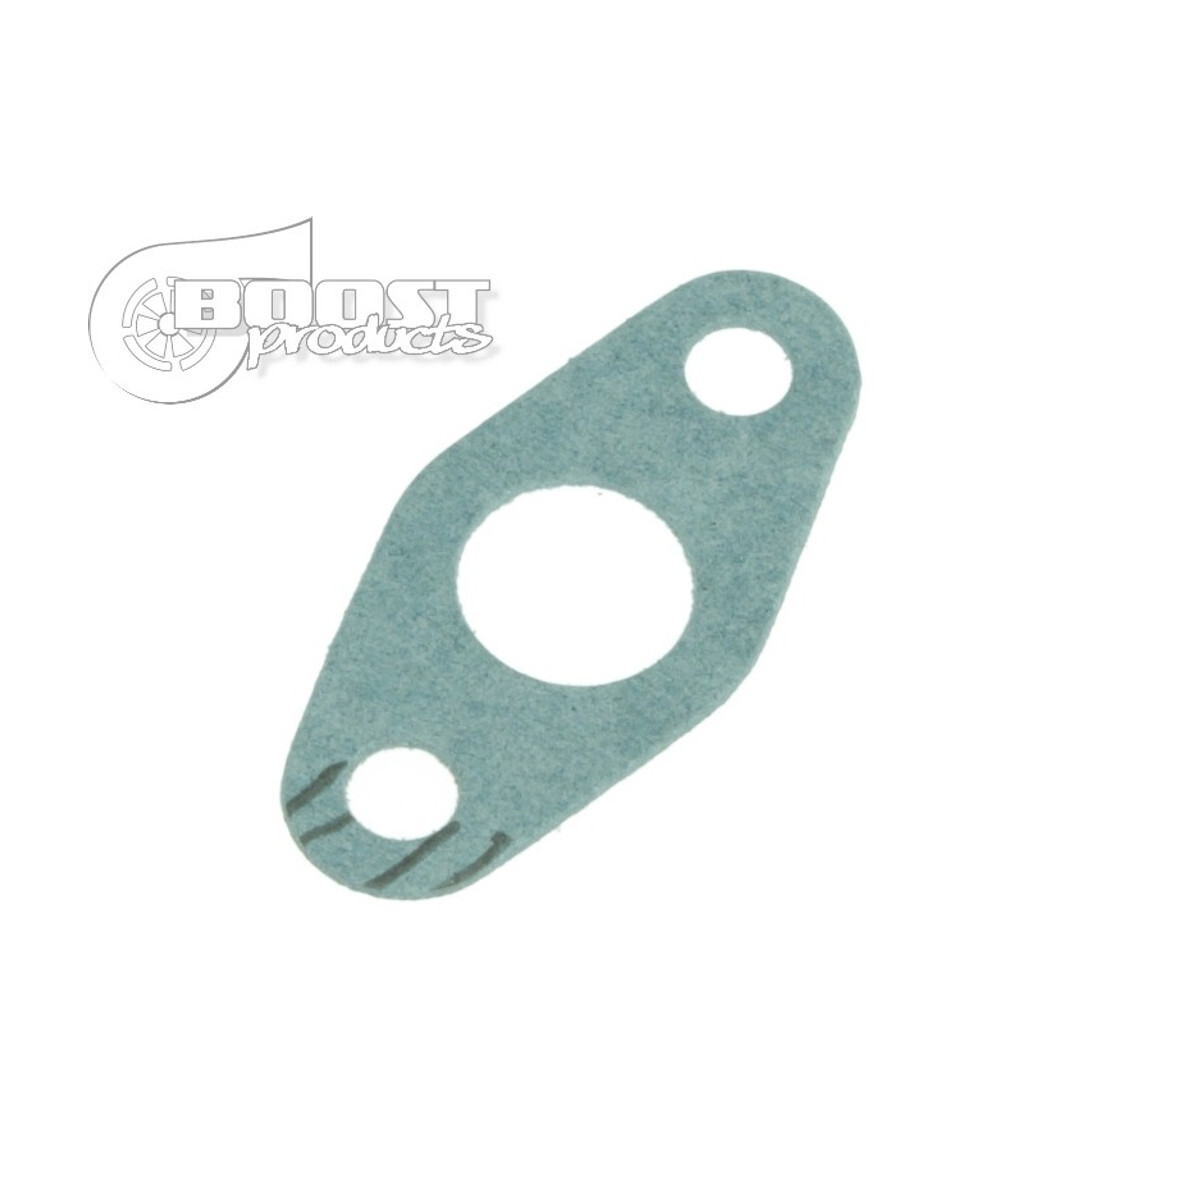 BOOST products Turbocharger Oil Supply Gasket T3 T4